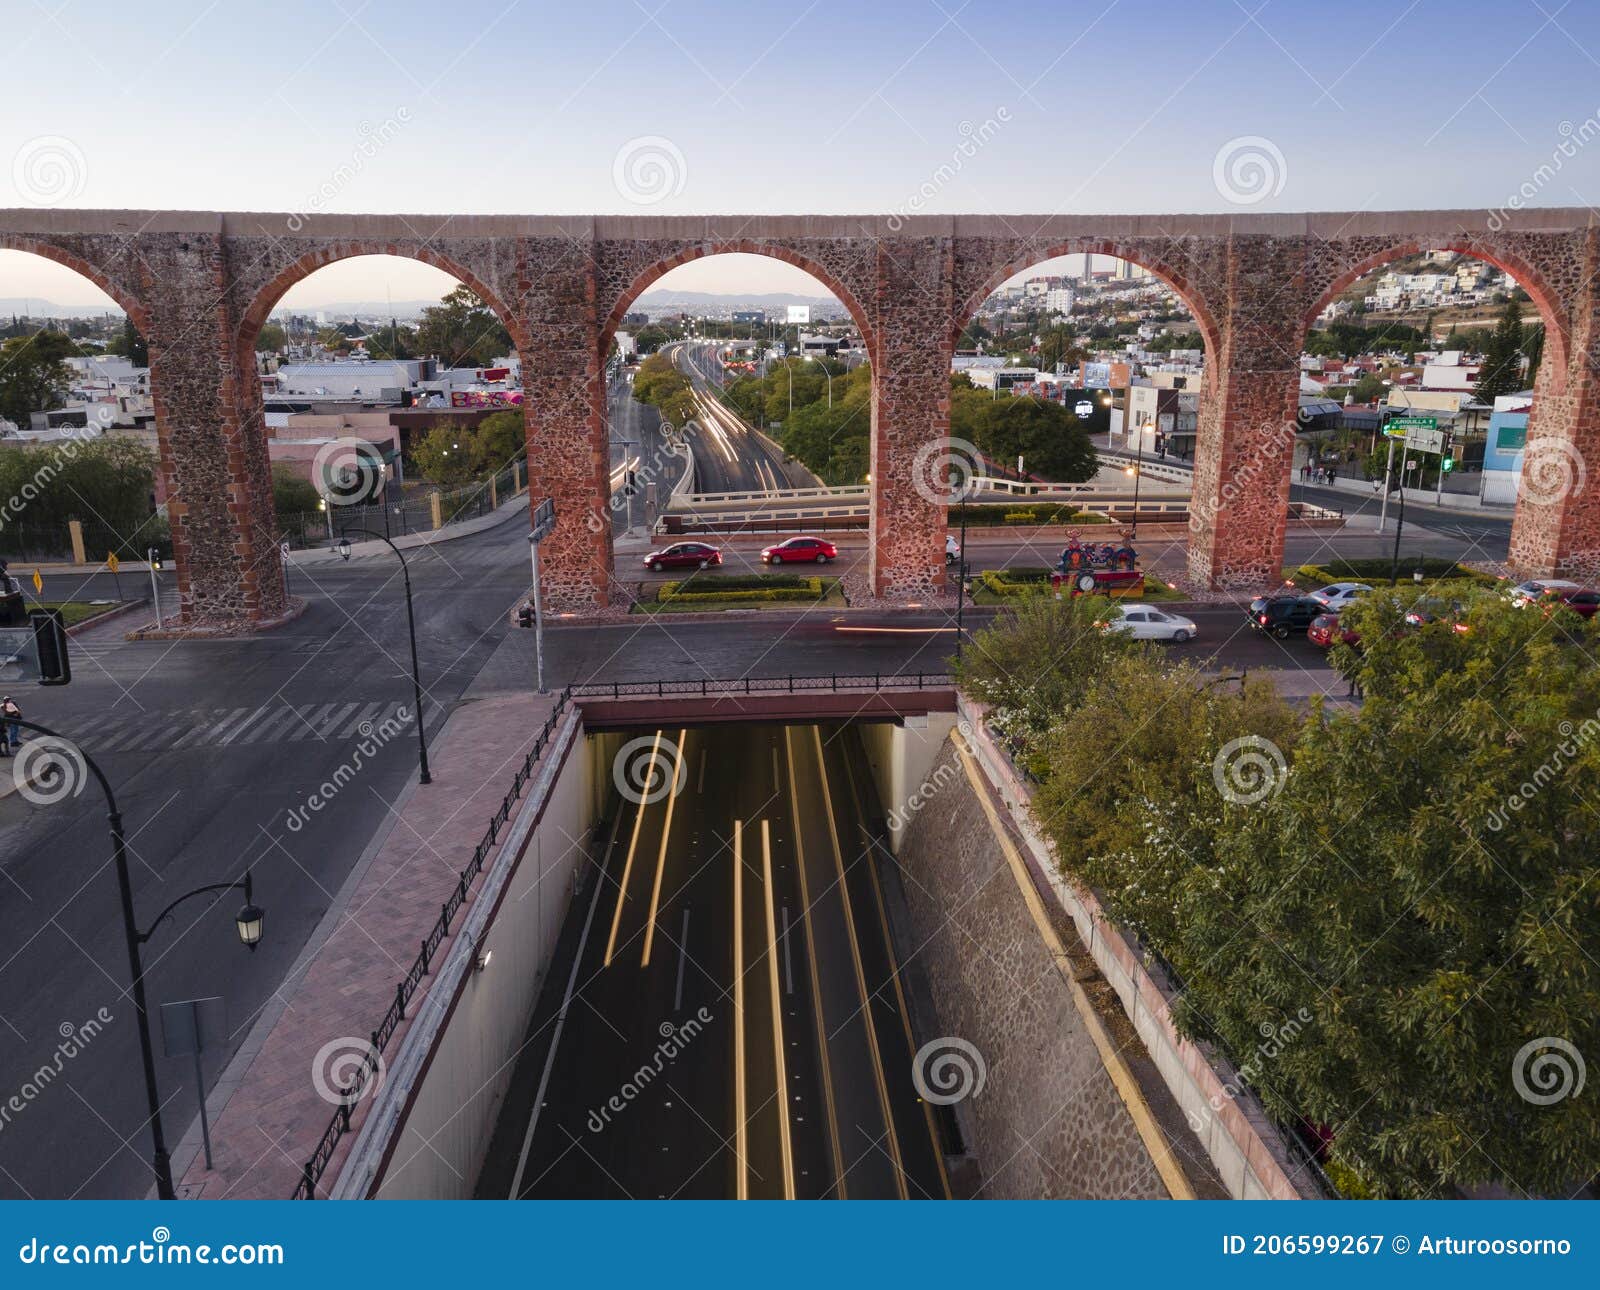 the aqueduct and boulevard quintana viewed from the air